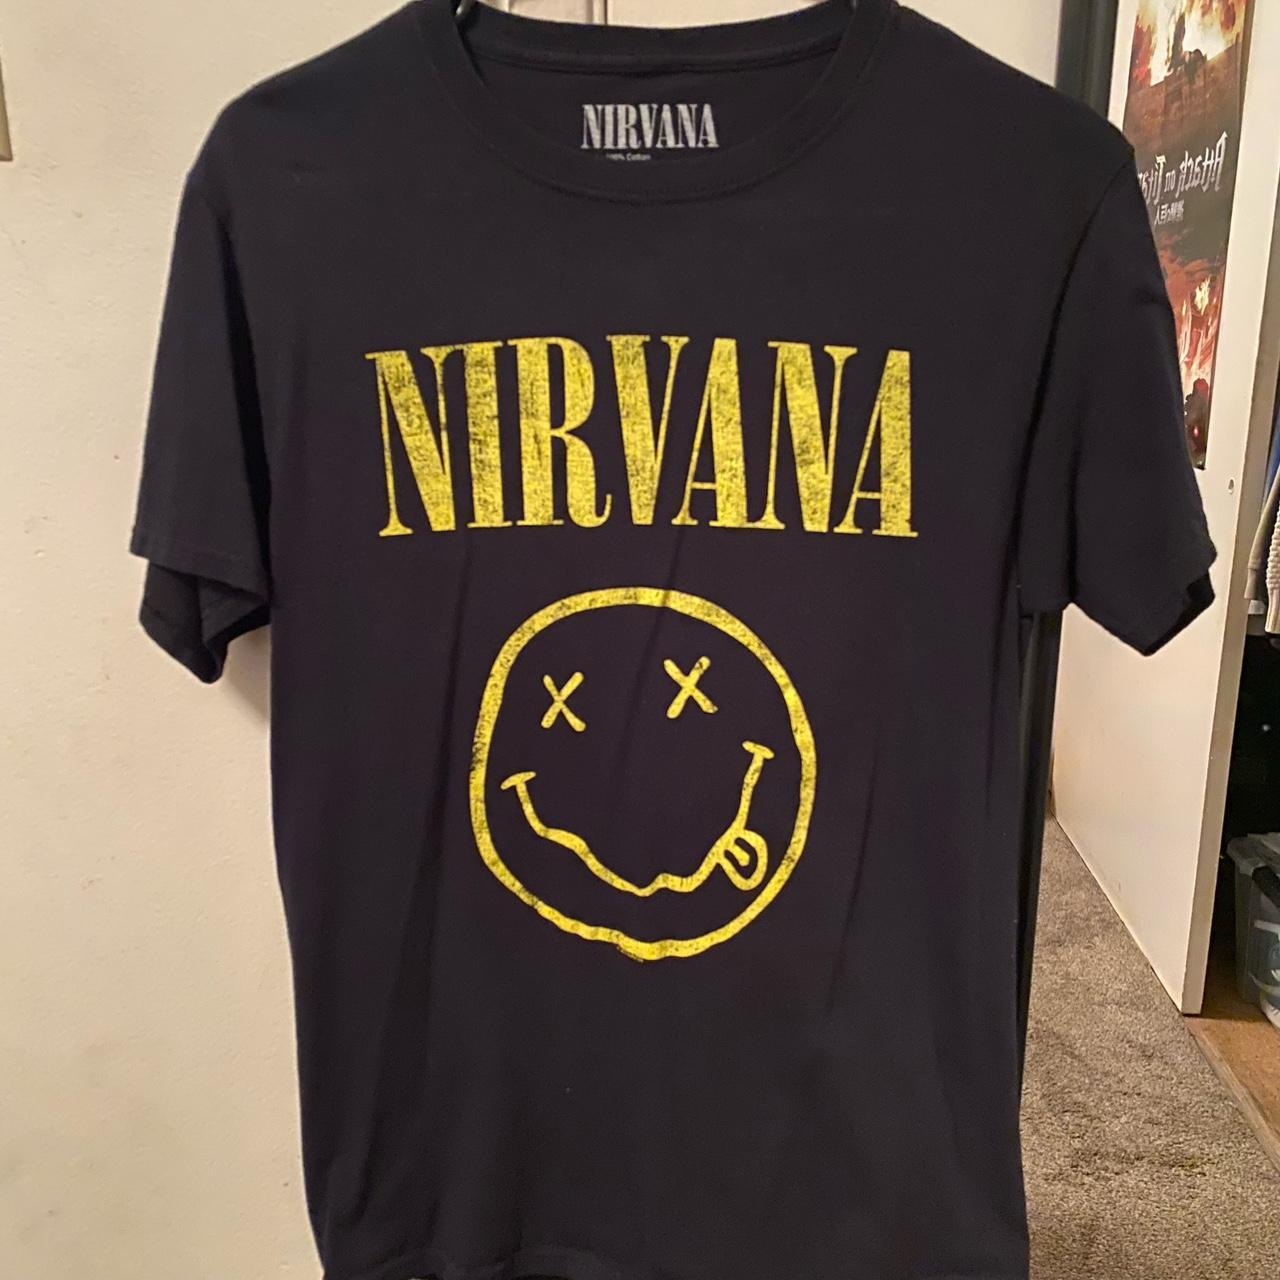 DEPOP PAYMENTS ONLY!! offers welcome Nirvana... - Depop